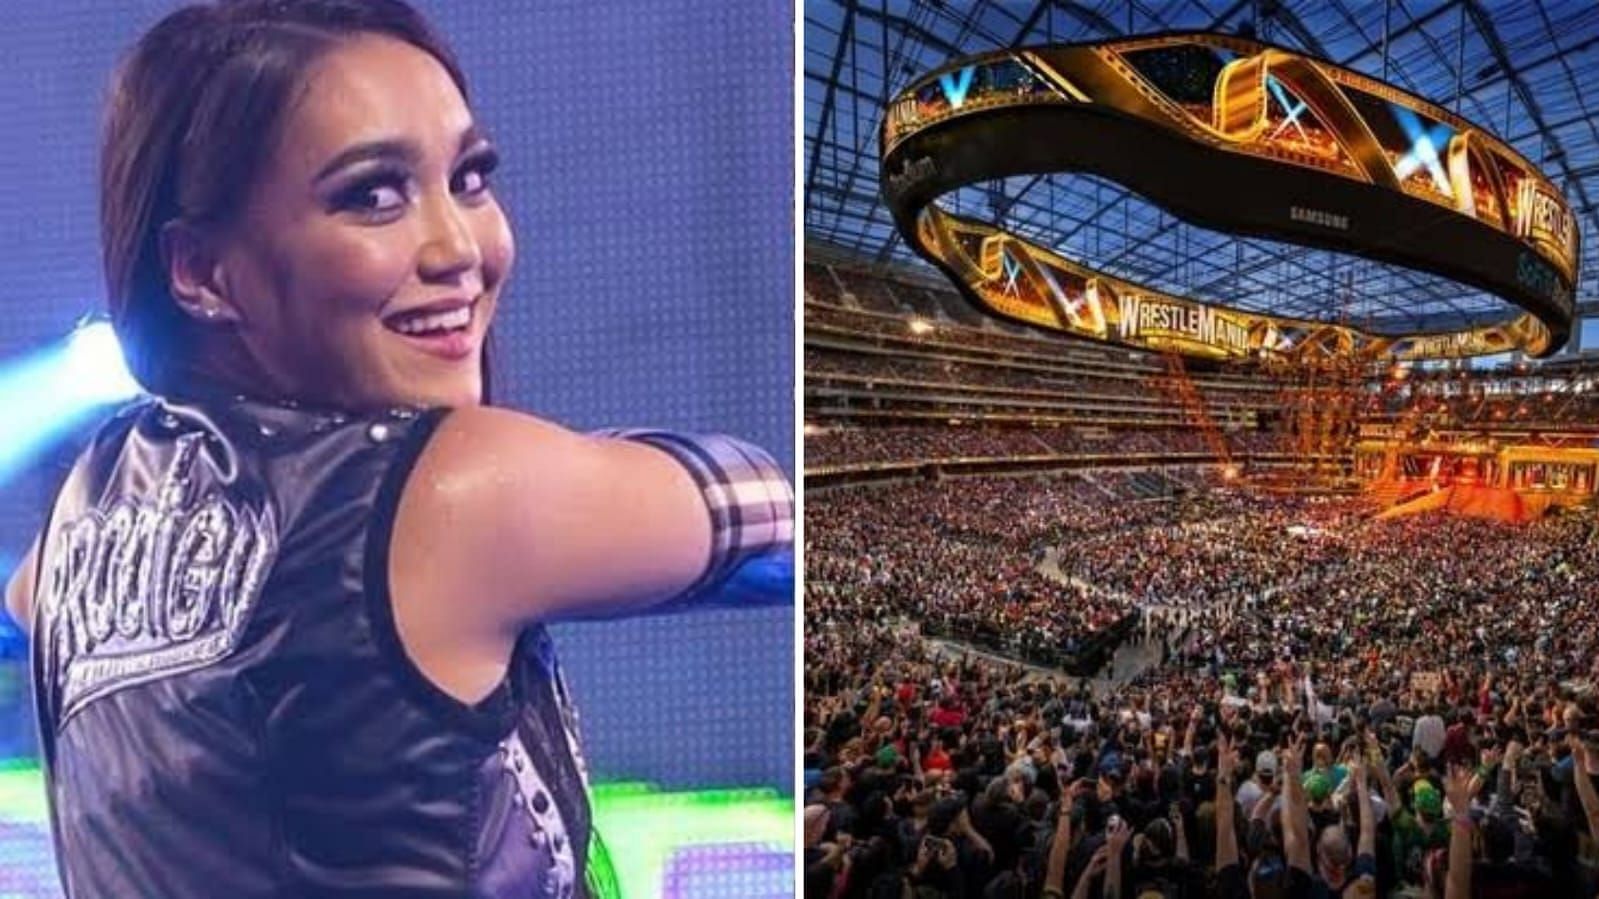 Roxanne Perez has her sights set on main eventing WrestleMania.